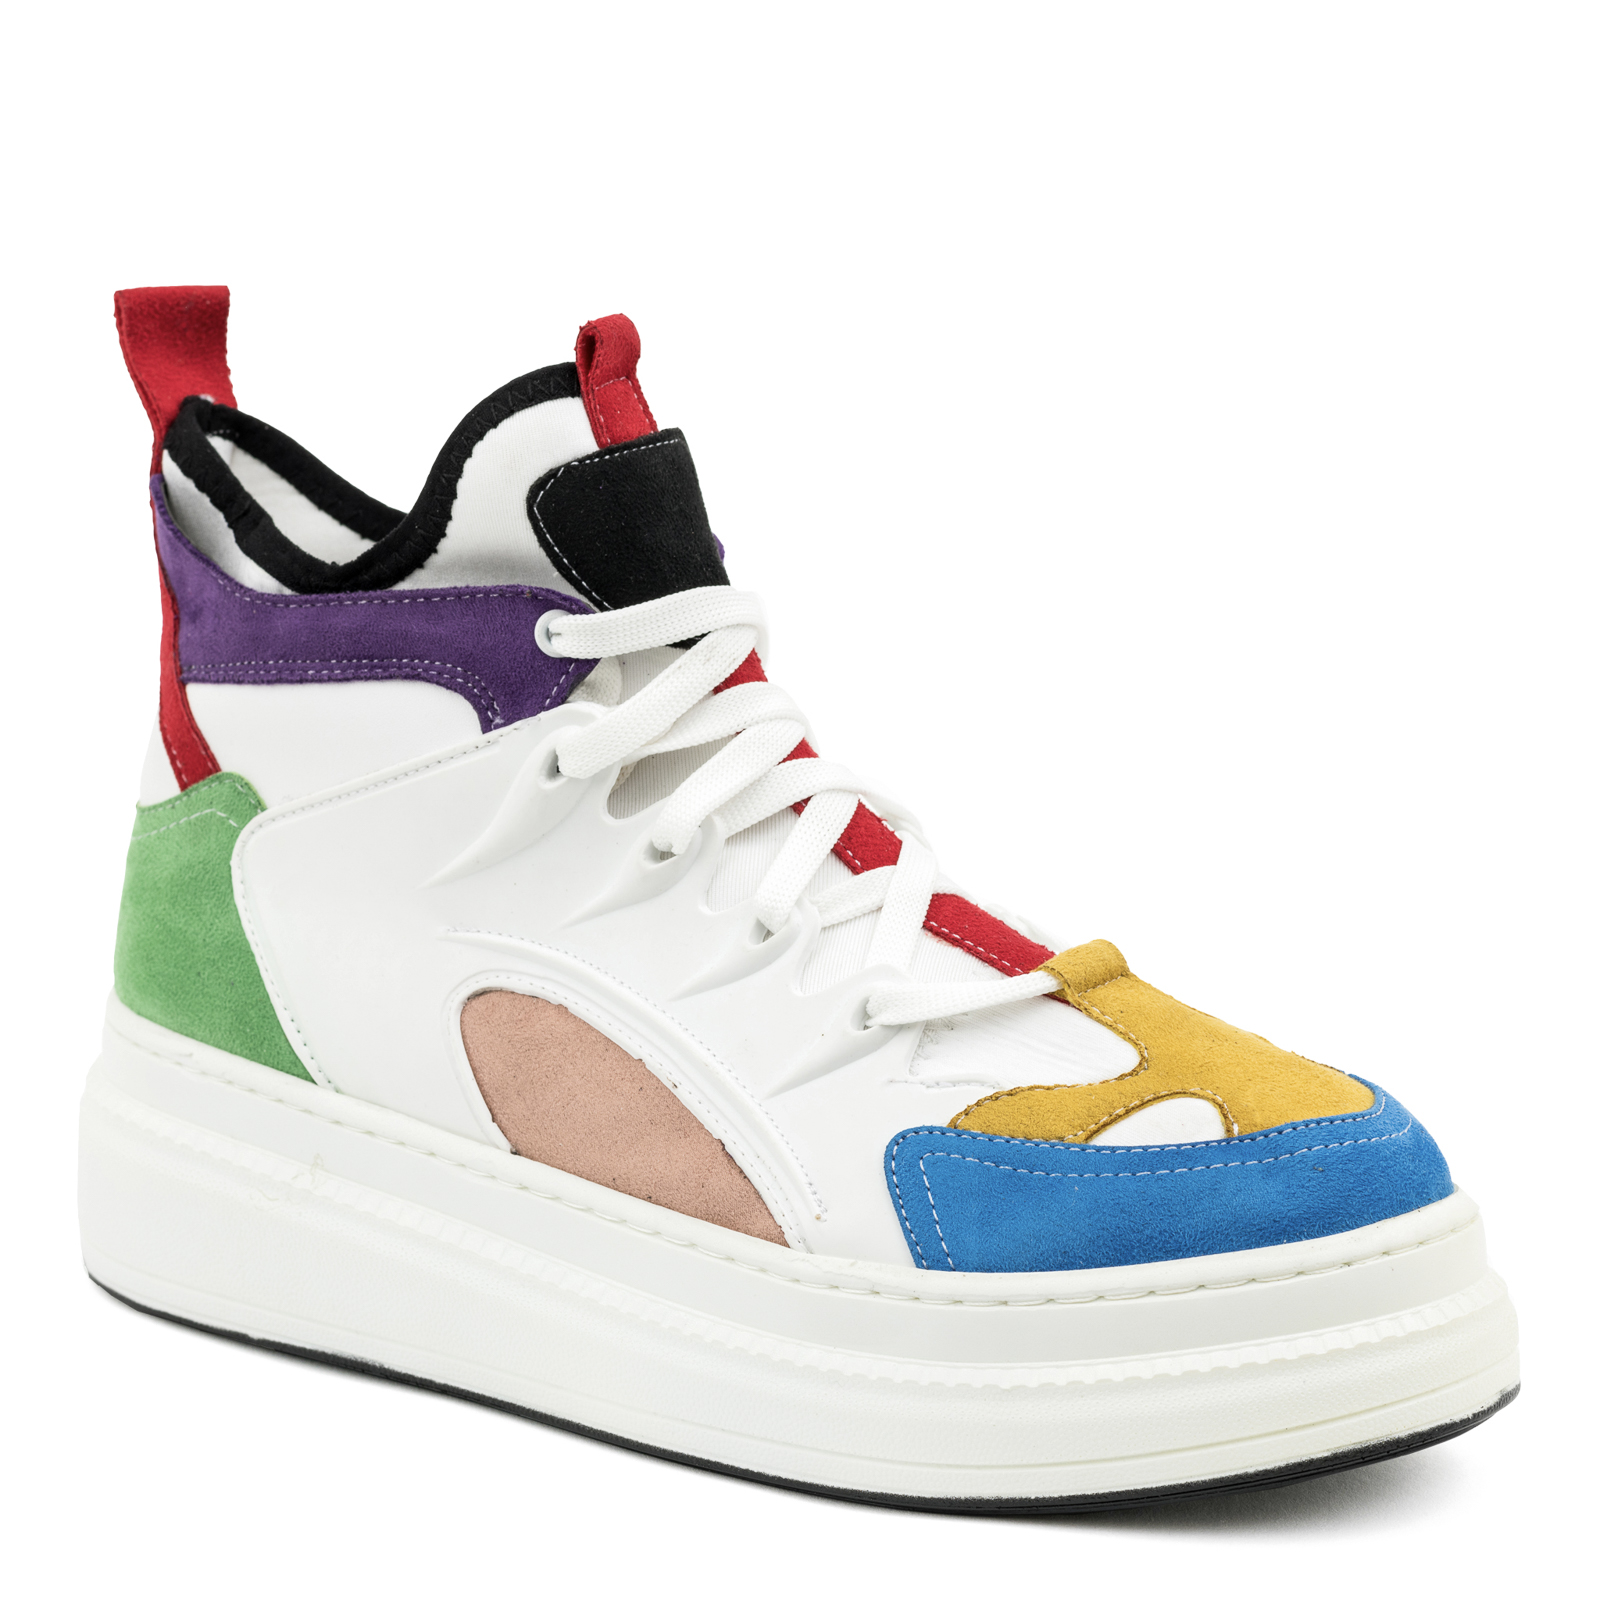 STRETCH SNEAKERS HIGH SOLE - WHITE